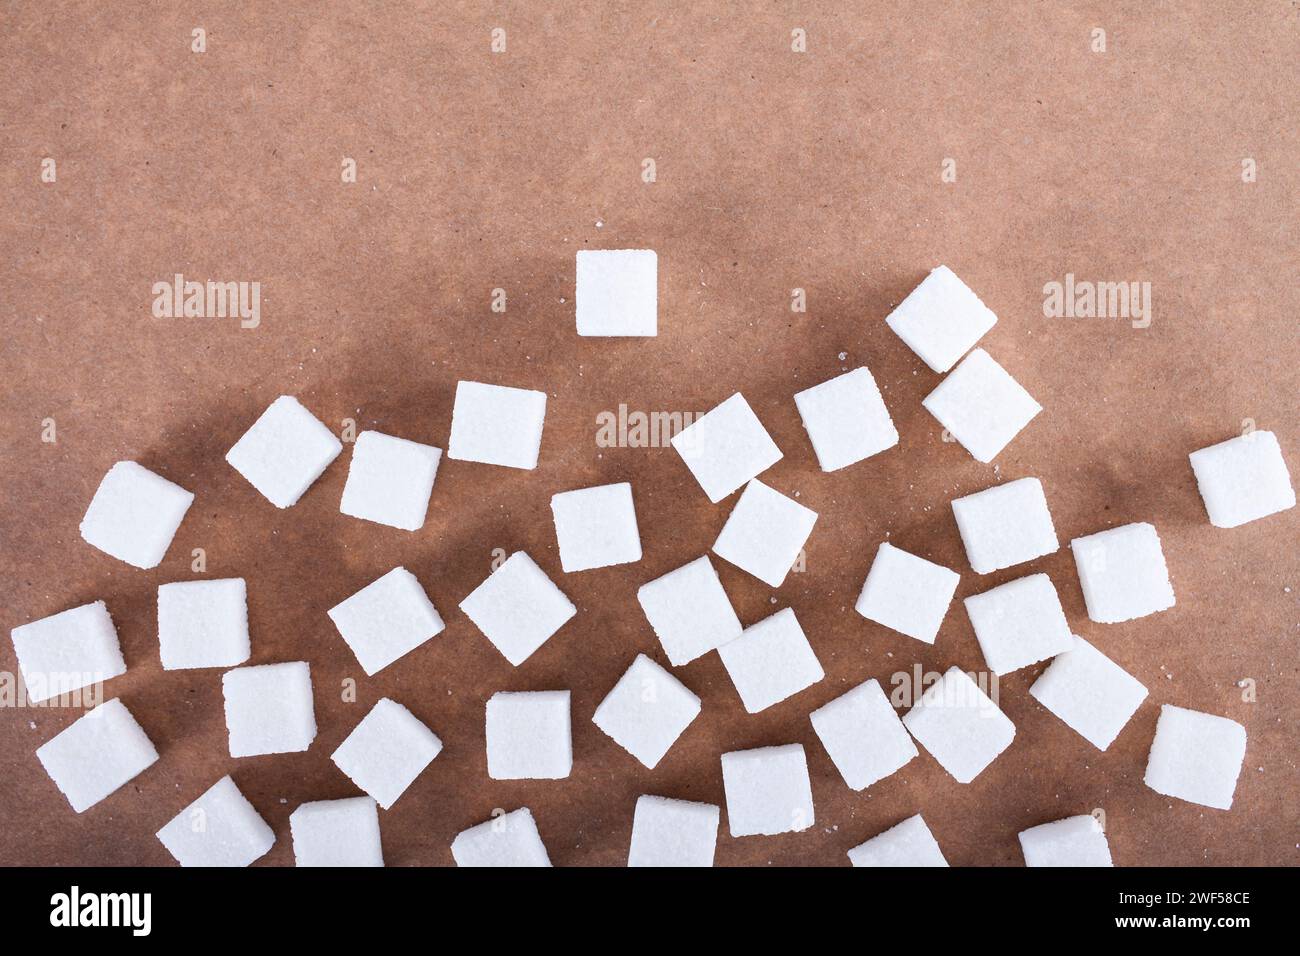 White sugar cubes on brown background Stock Photo